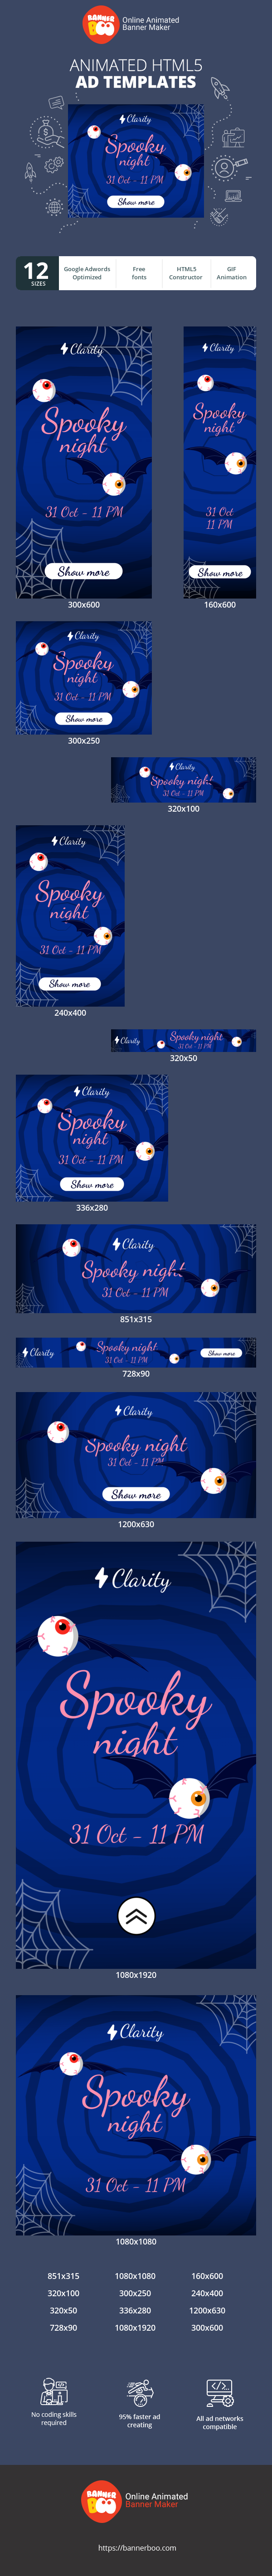 Banner ad template — Spooky Night — 31 Oct - 11 Pm